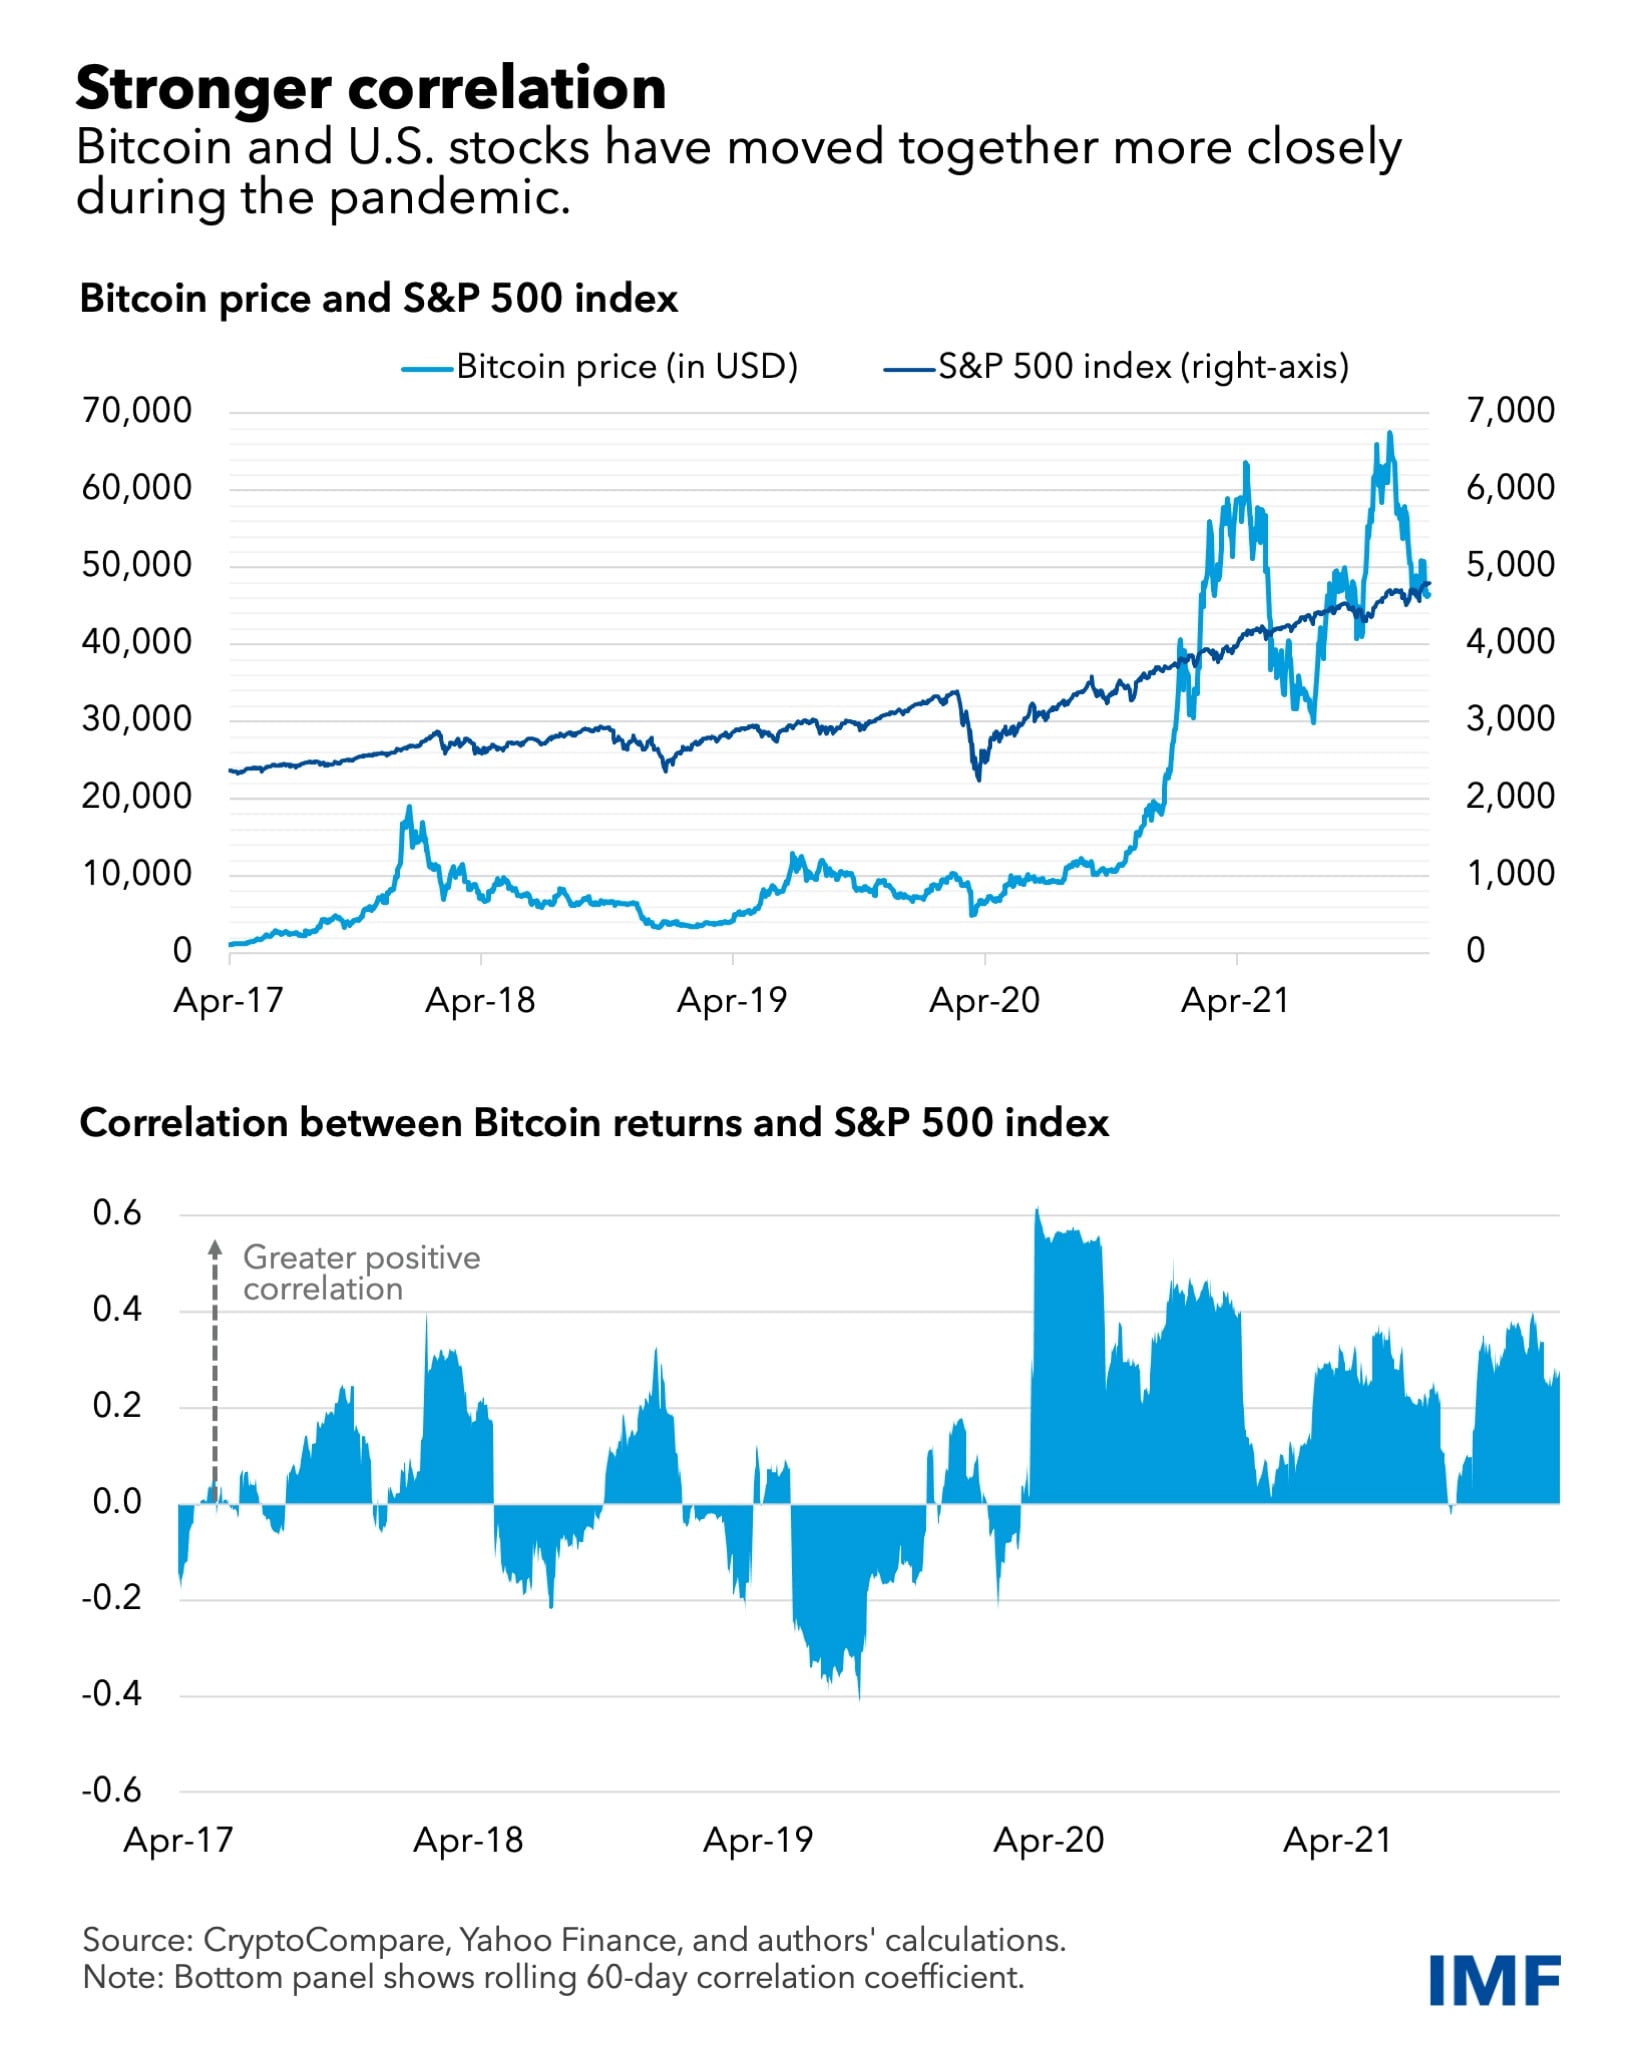 The 60-day correlation coefficient between Bitcoin and S&P 500. Source: IMF